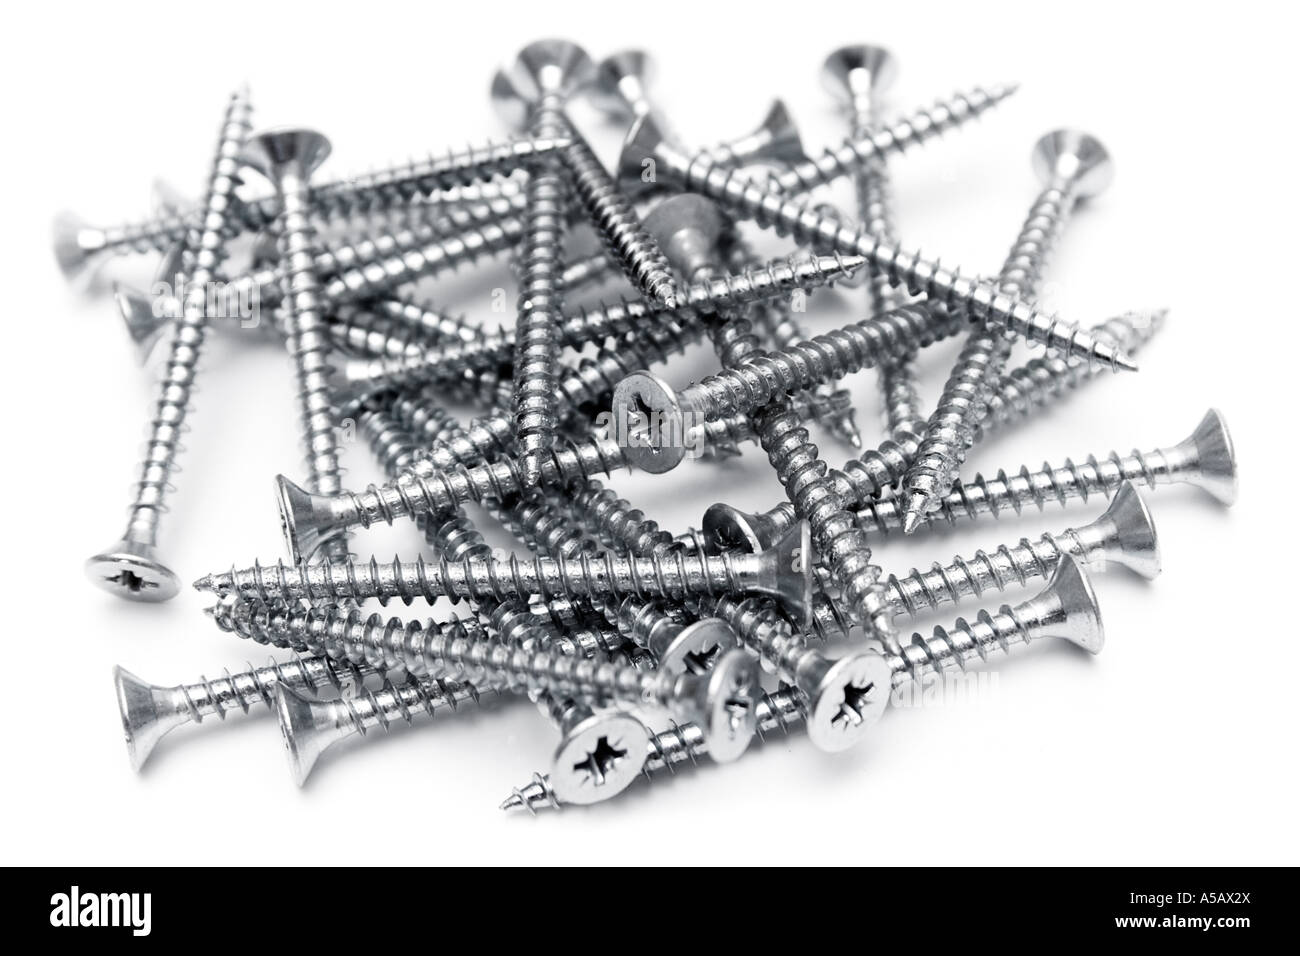 Bunch of screws isolated on a white background. Stock Photo